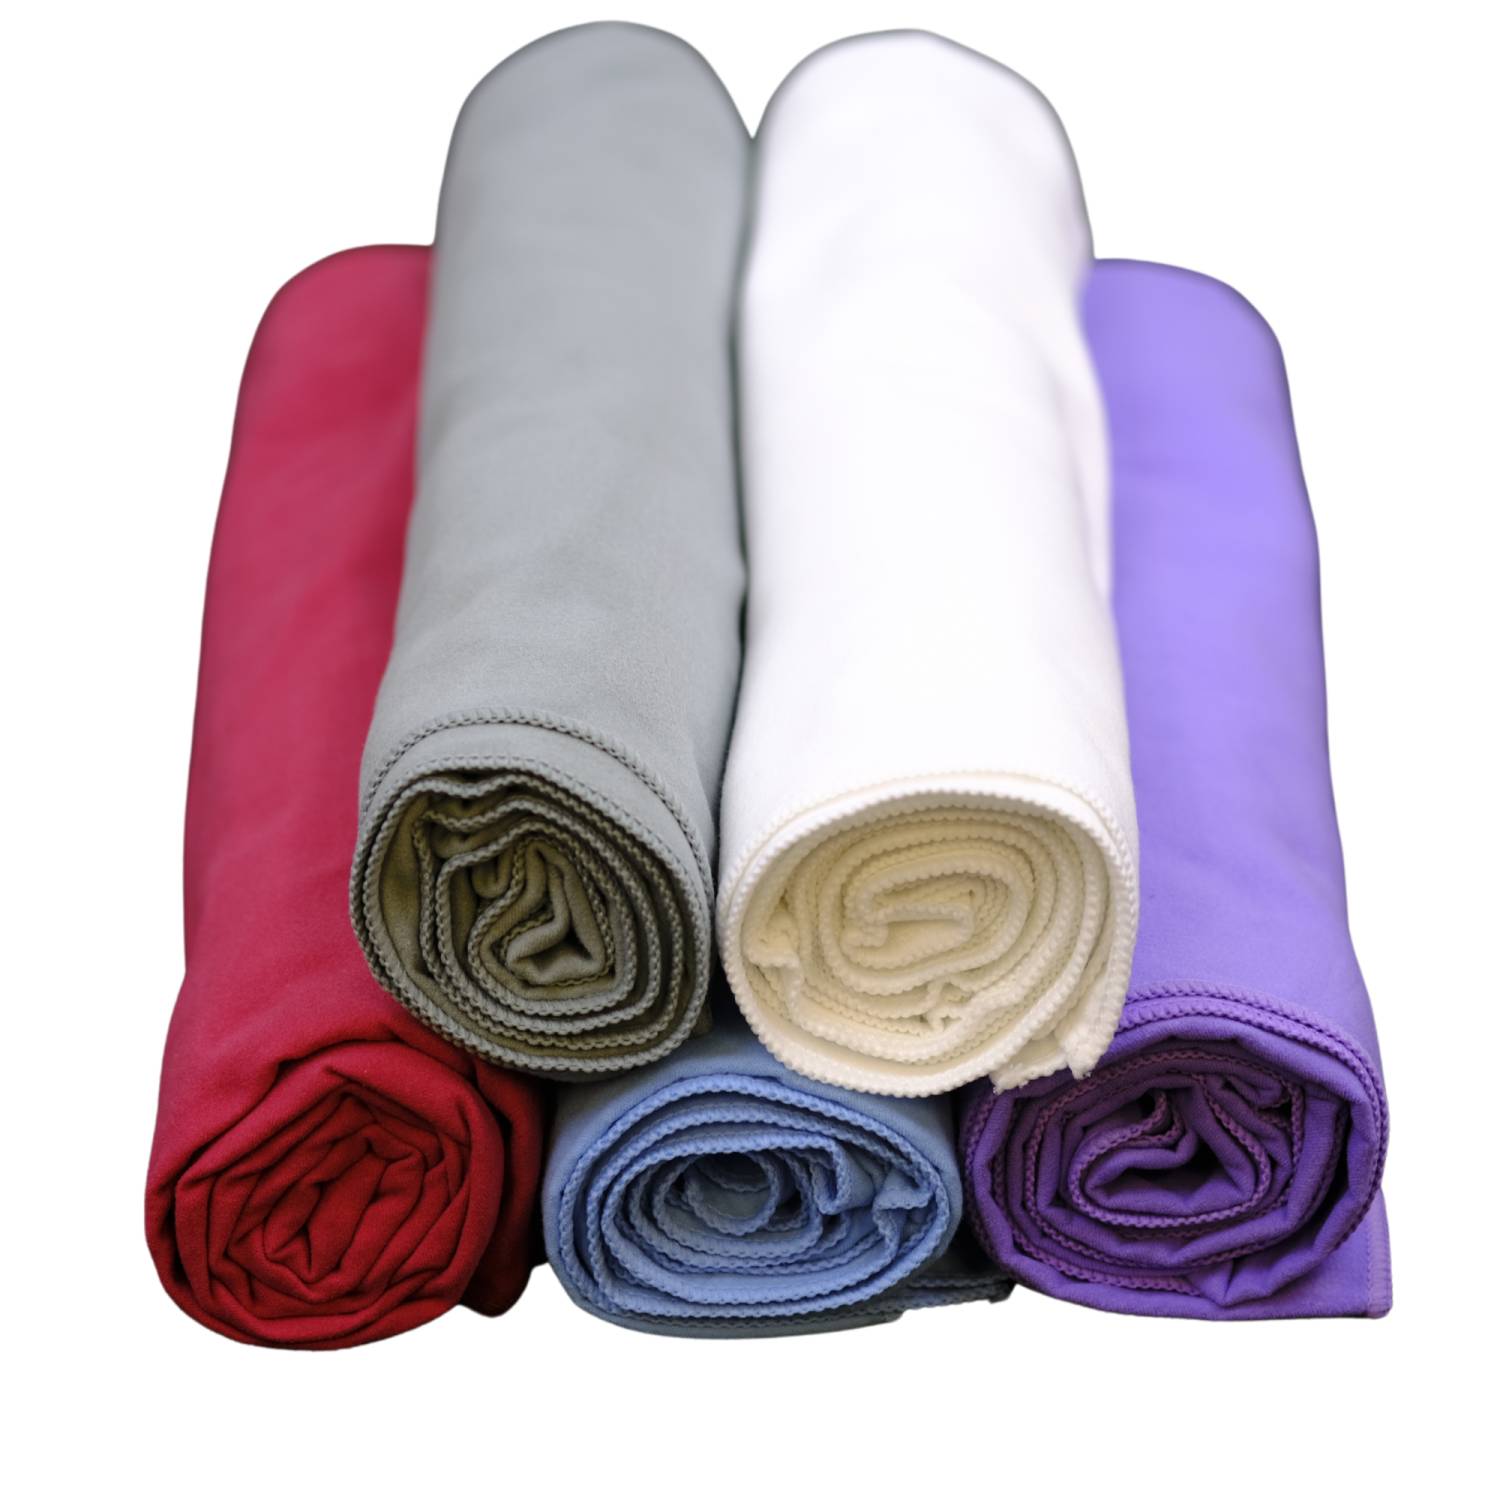 All Microfibre Sports/Beach Towels in Grey, White, Red, Blue & Purple